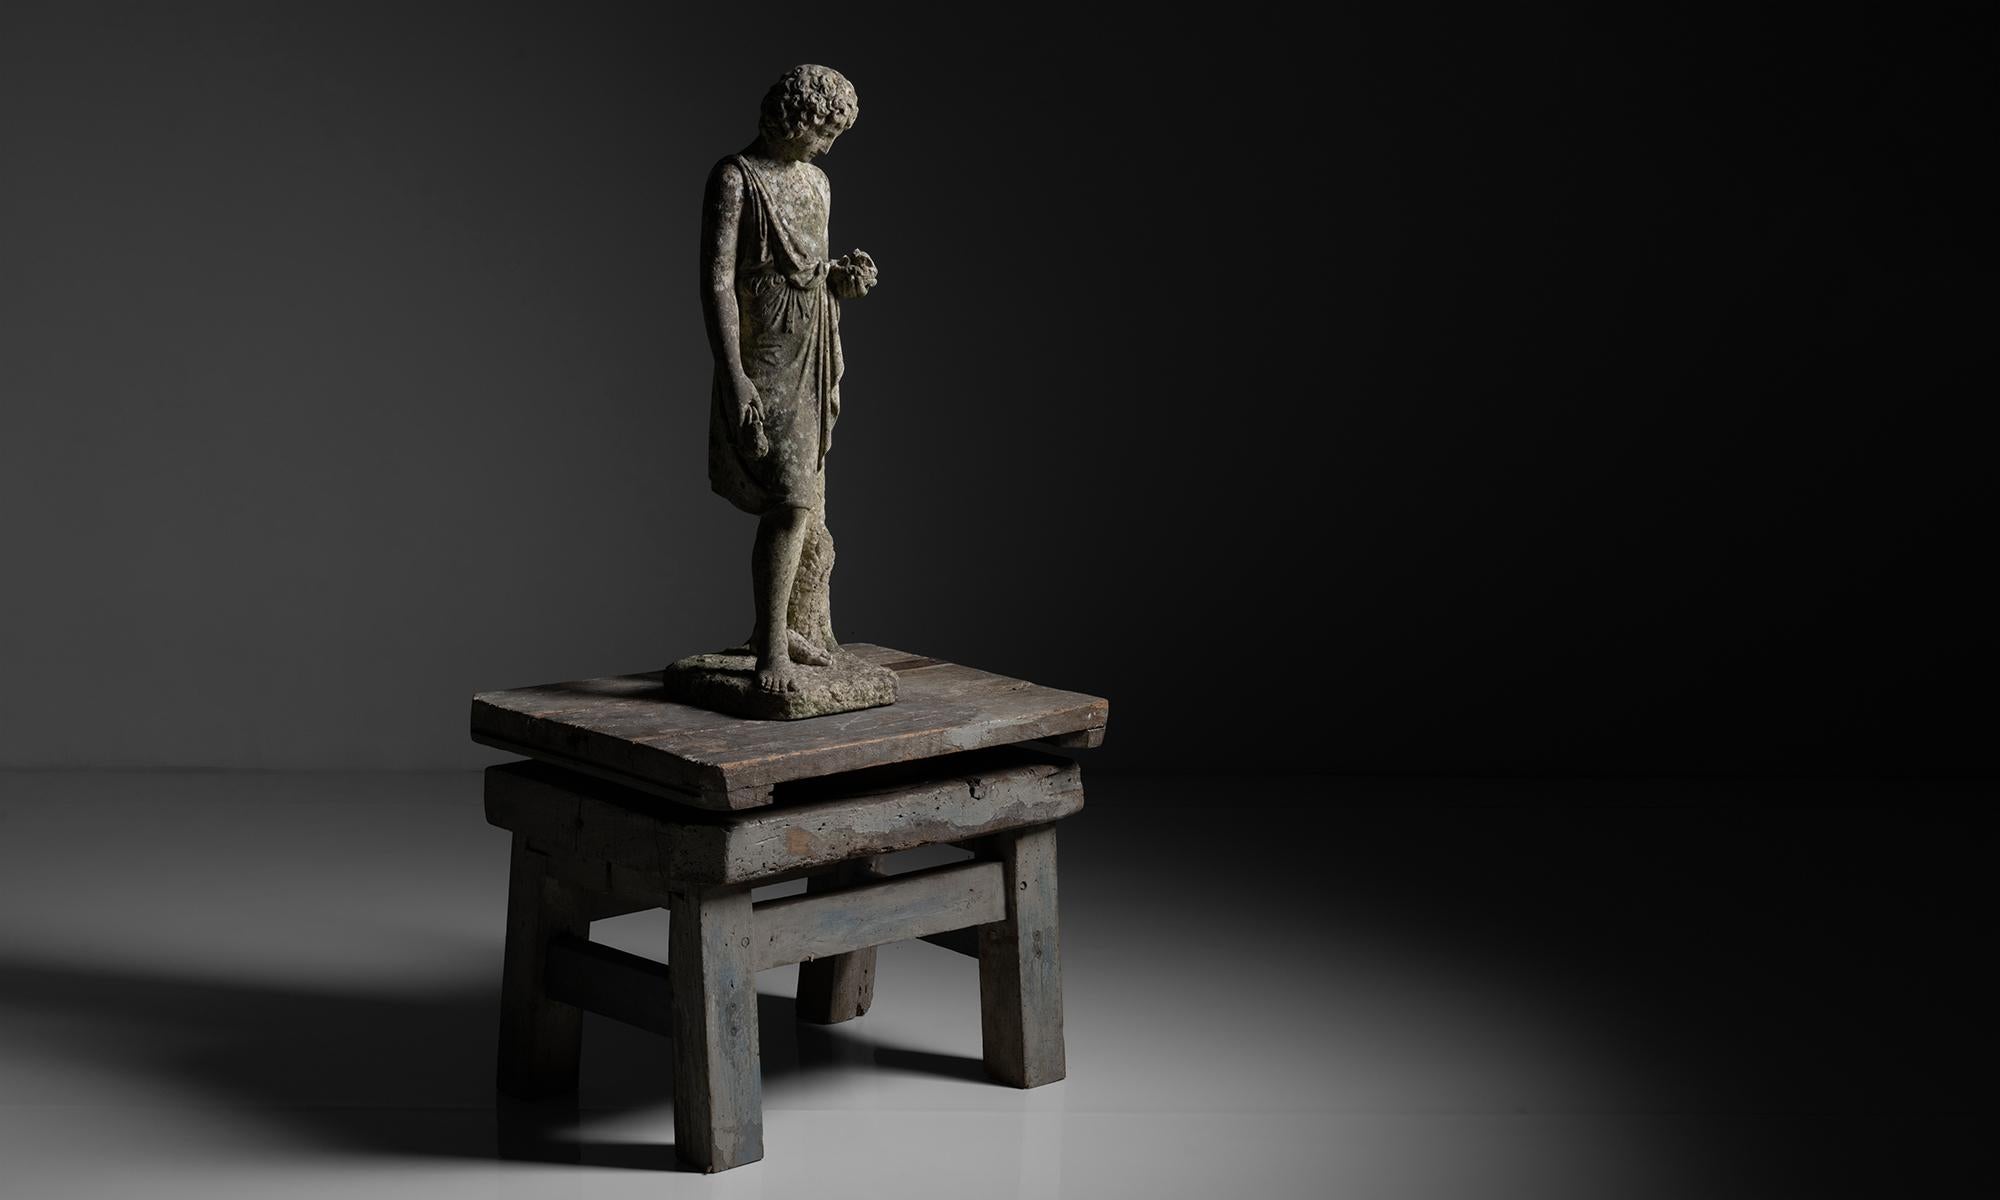 19th Century Low Sculptor's Stand, France circa 1900